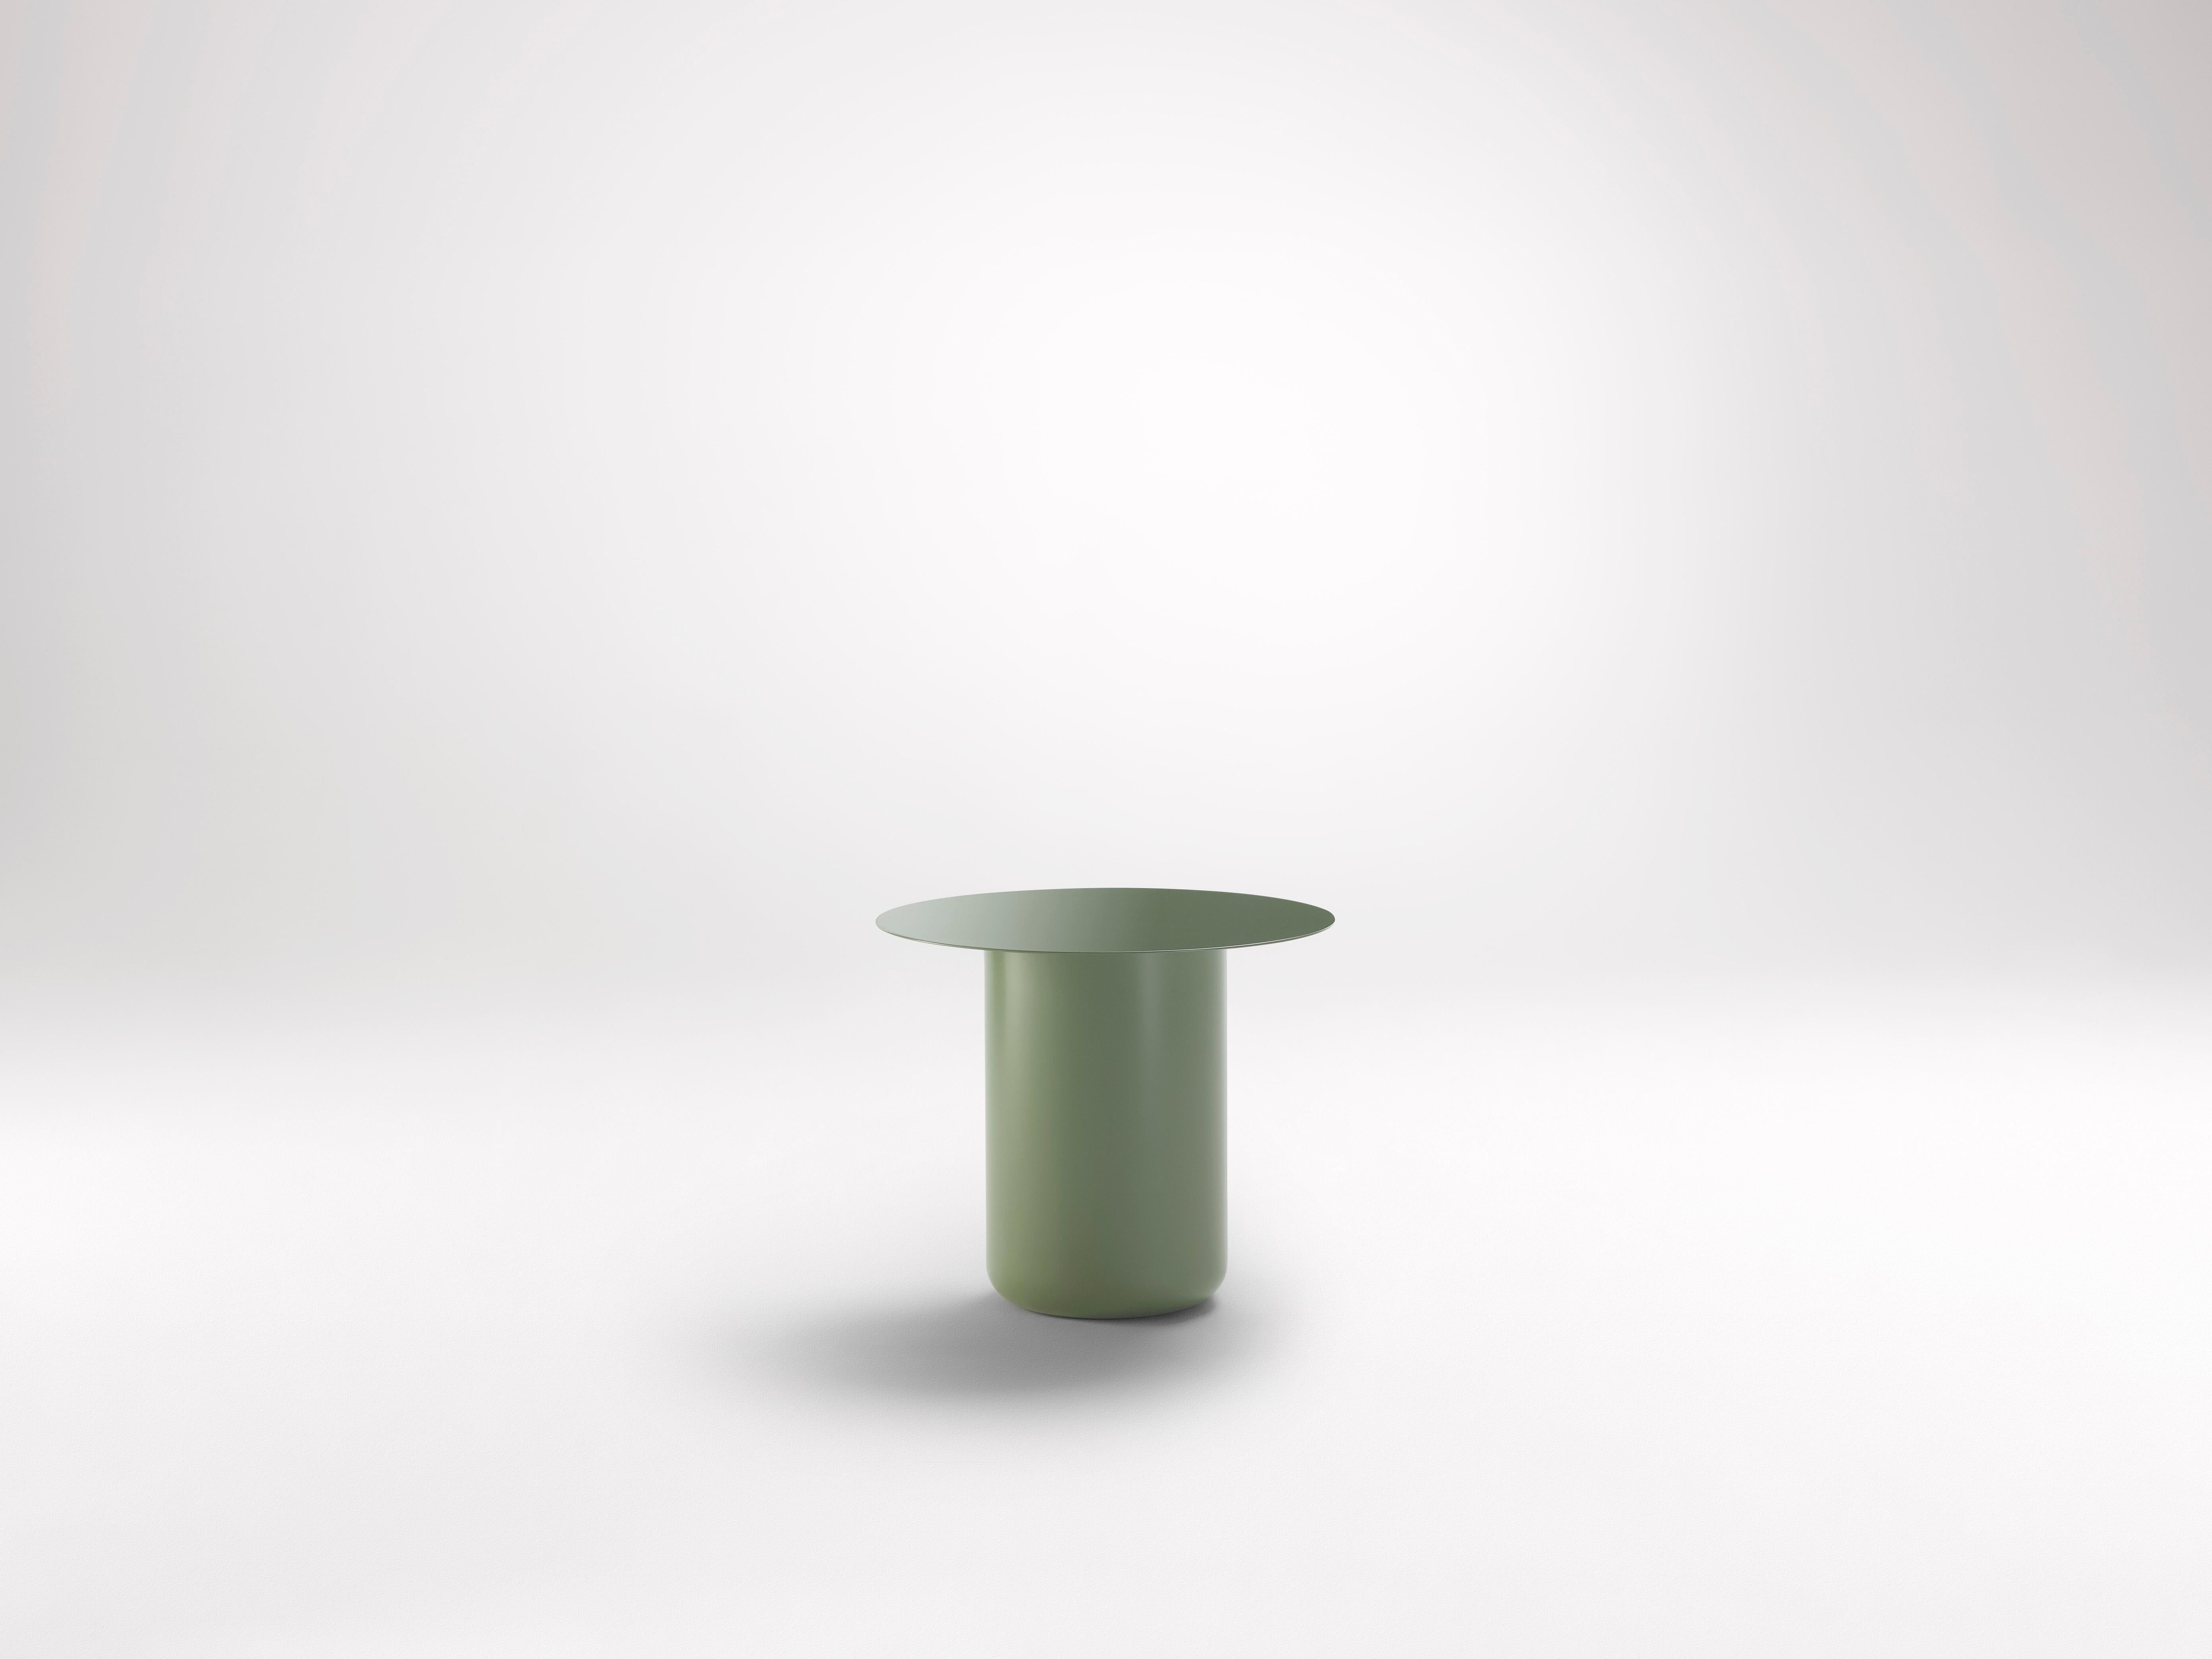 Woodland Grey Table 01 by Coco Flip
Dimensions: D 48 x W 48 x H 32 / 36 / 40 / 42 cm
Materials: Mild steel, powder-coated with zinc undercoat. 
Weight: 12kg

Coco Flip is a Melbourne based furniture and lighting design studio, run by us, Kate Stokes